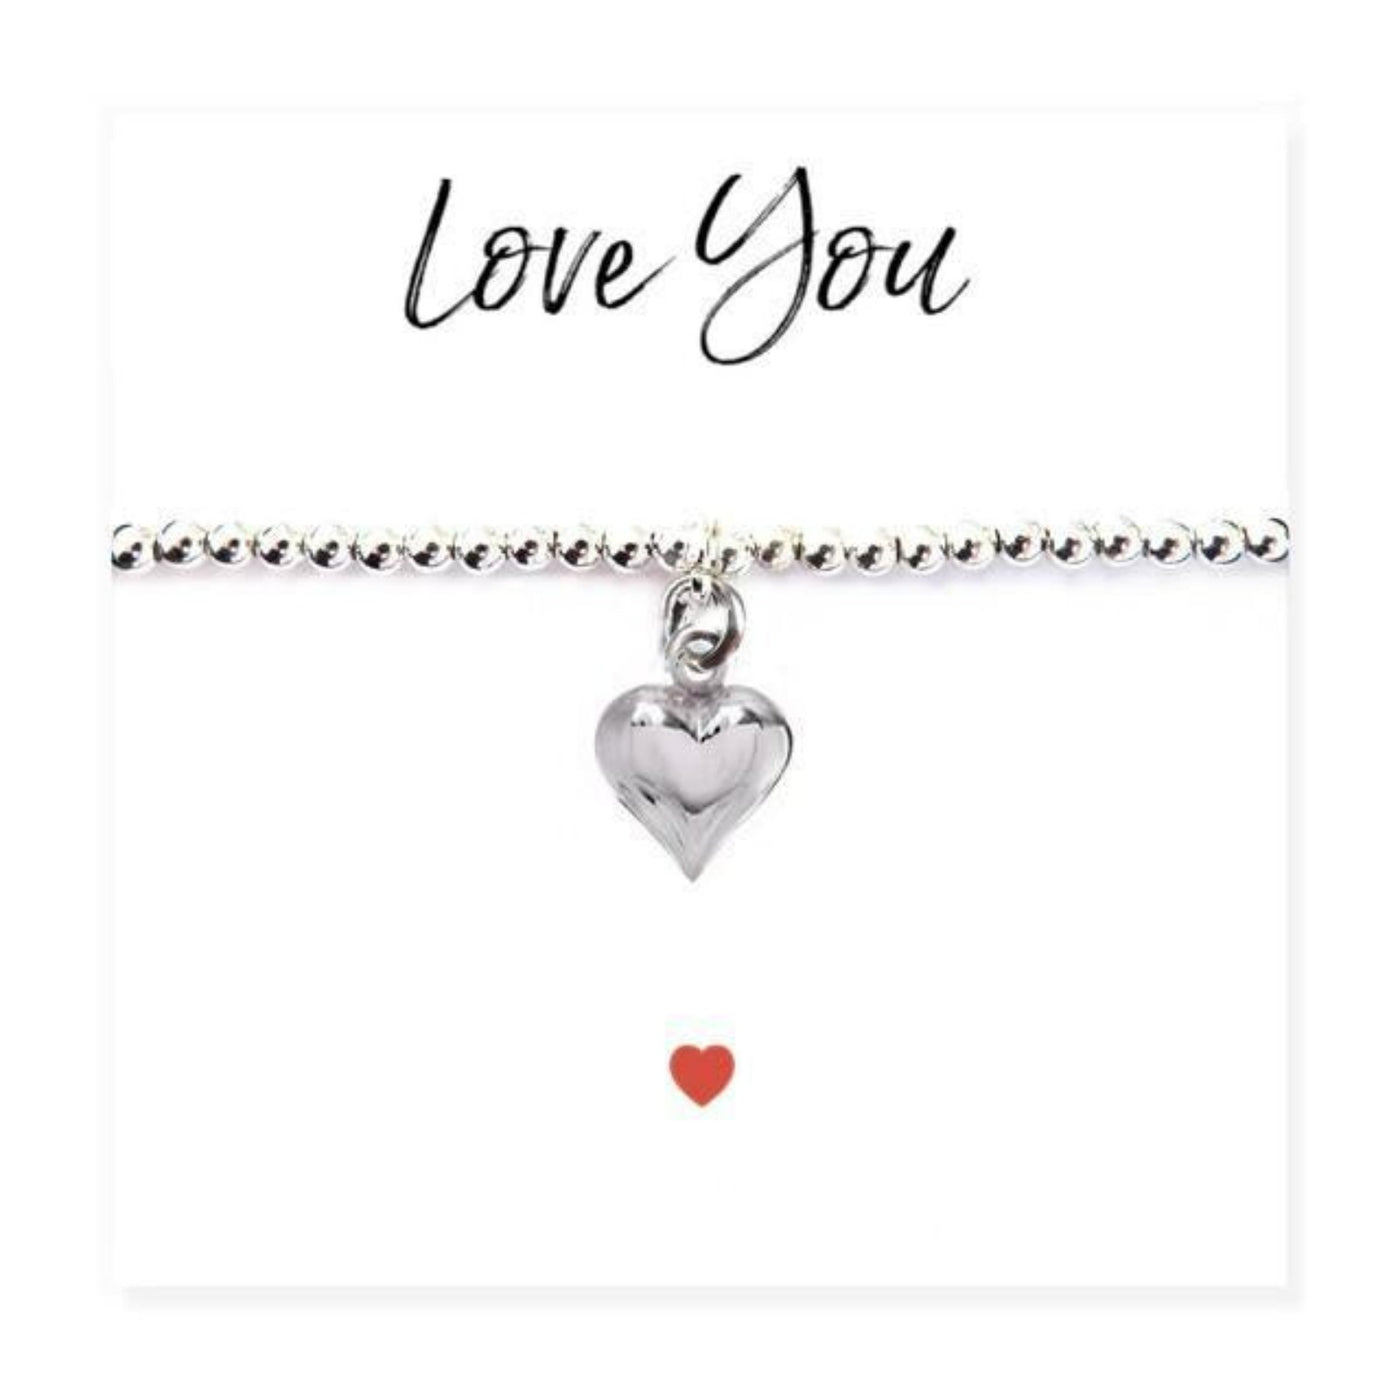 Love You - Heart Stretch Gift Beaded Bracelet With Message Card.